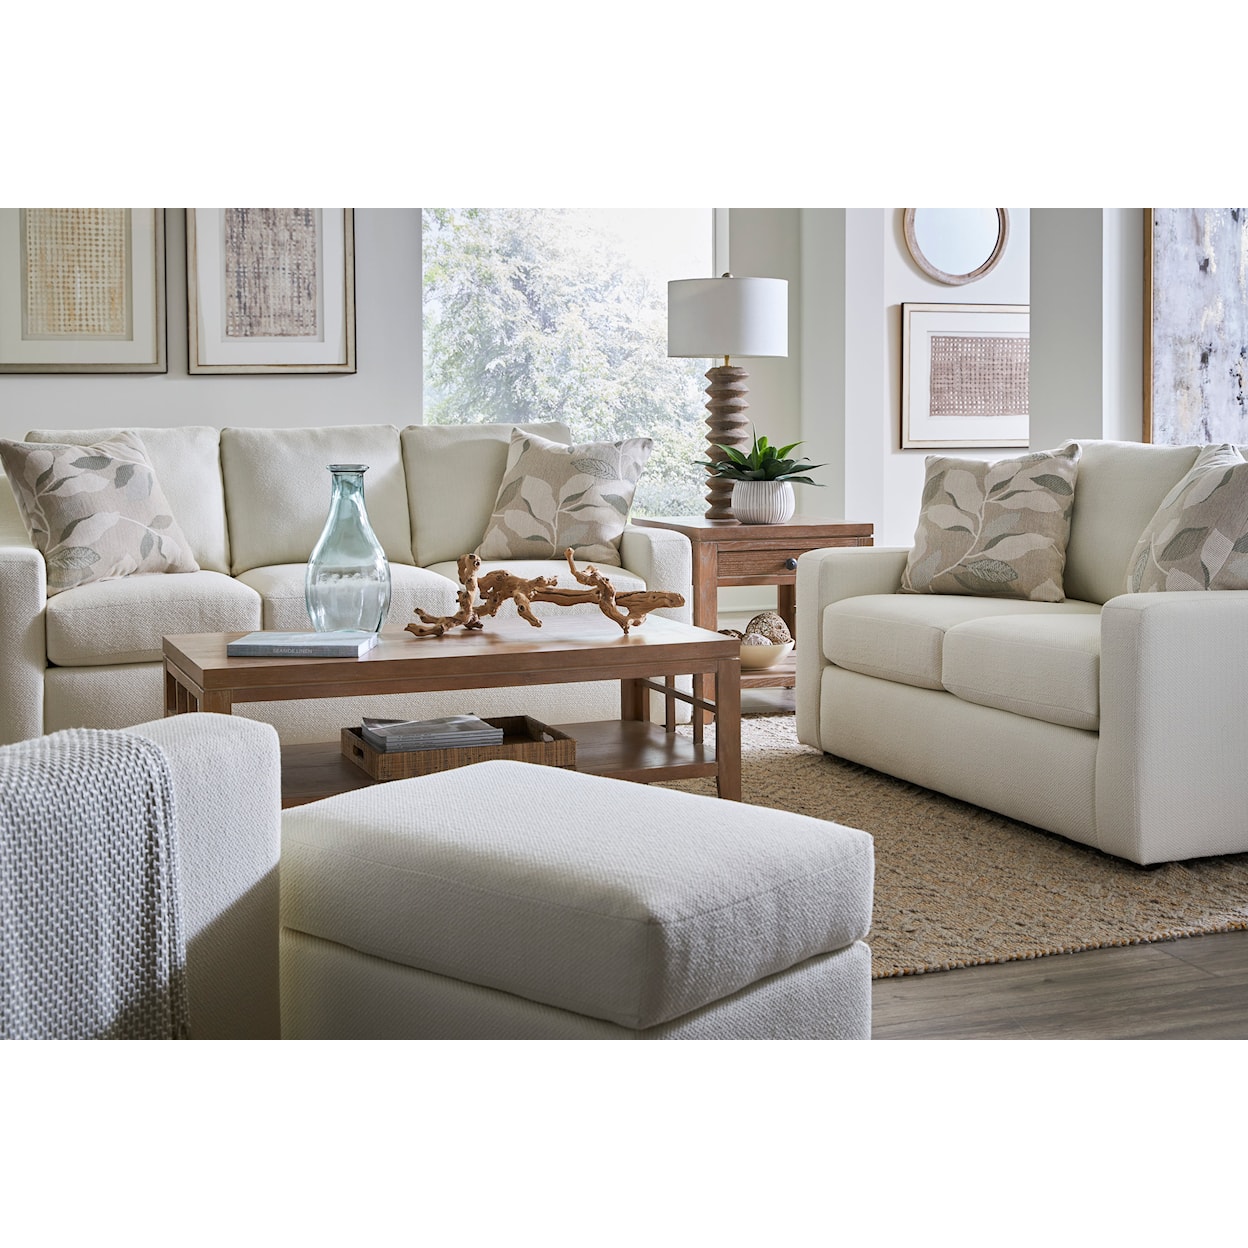 Pearce Square Arm Upholstered Twin Sleeper Sofa with Memory Foam